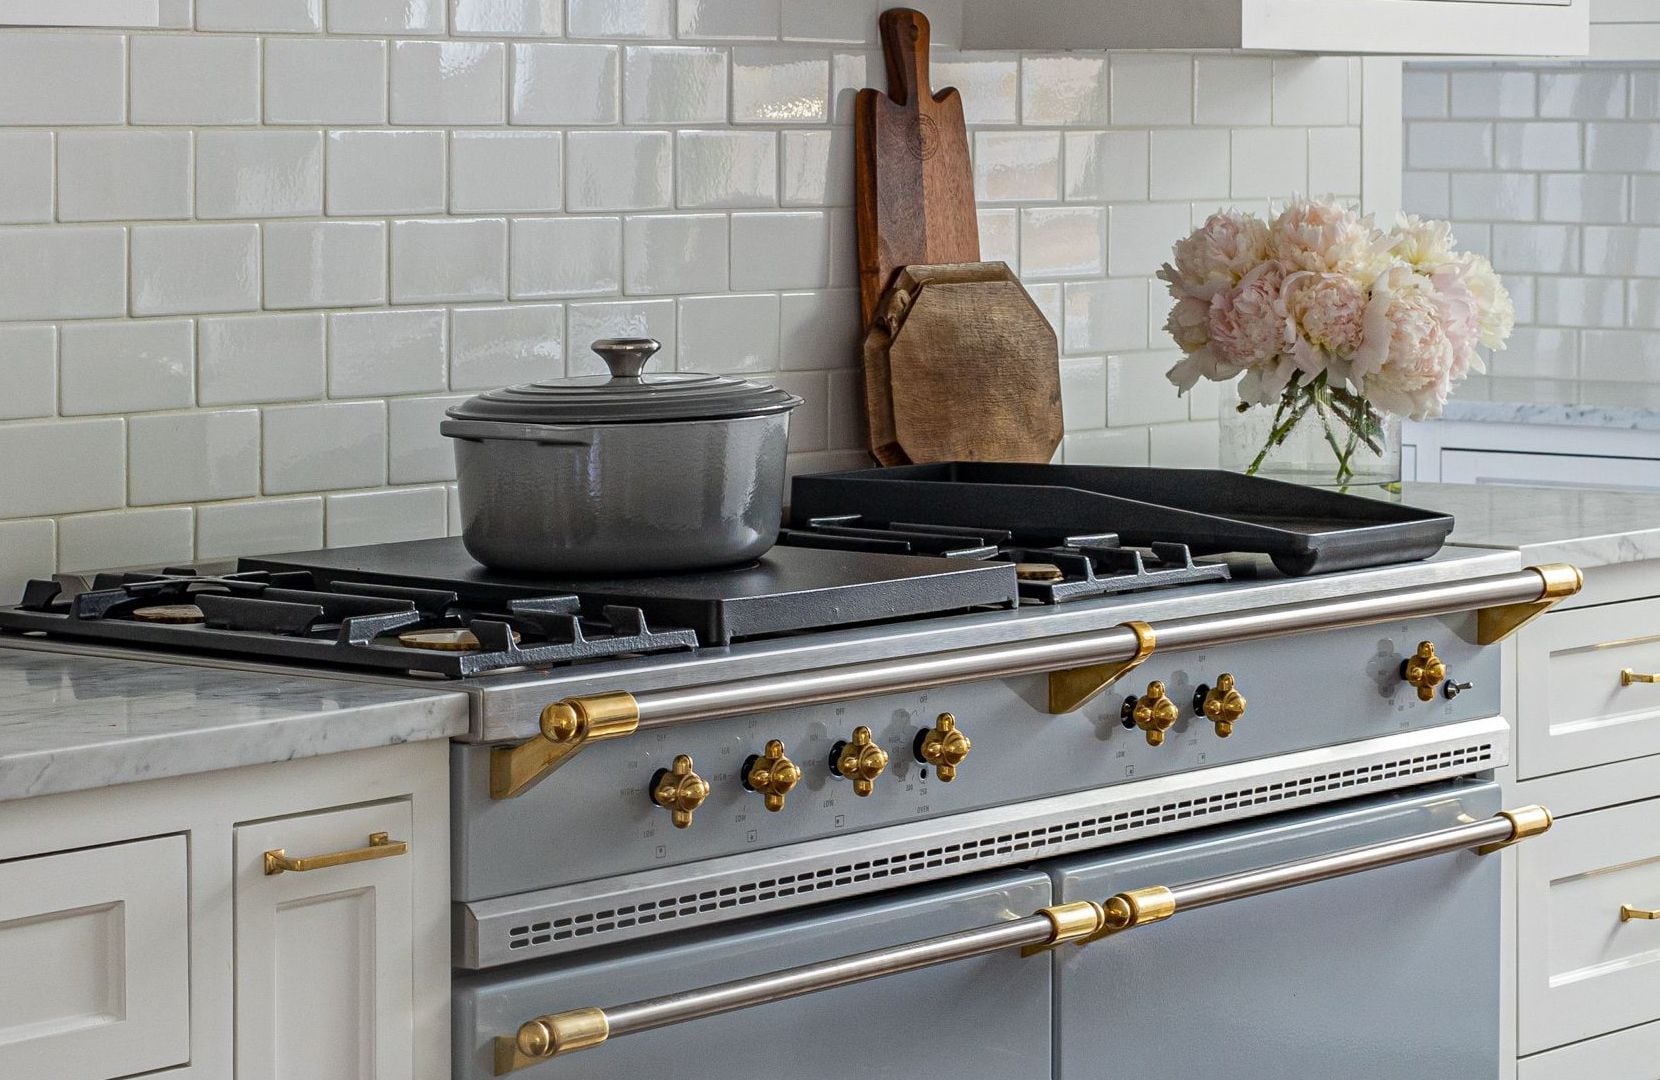 The Latest Kitchen Trend: Mixing Metals - Cafe Appliances